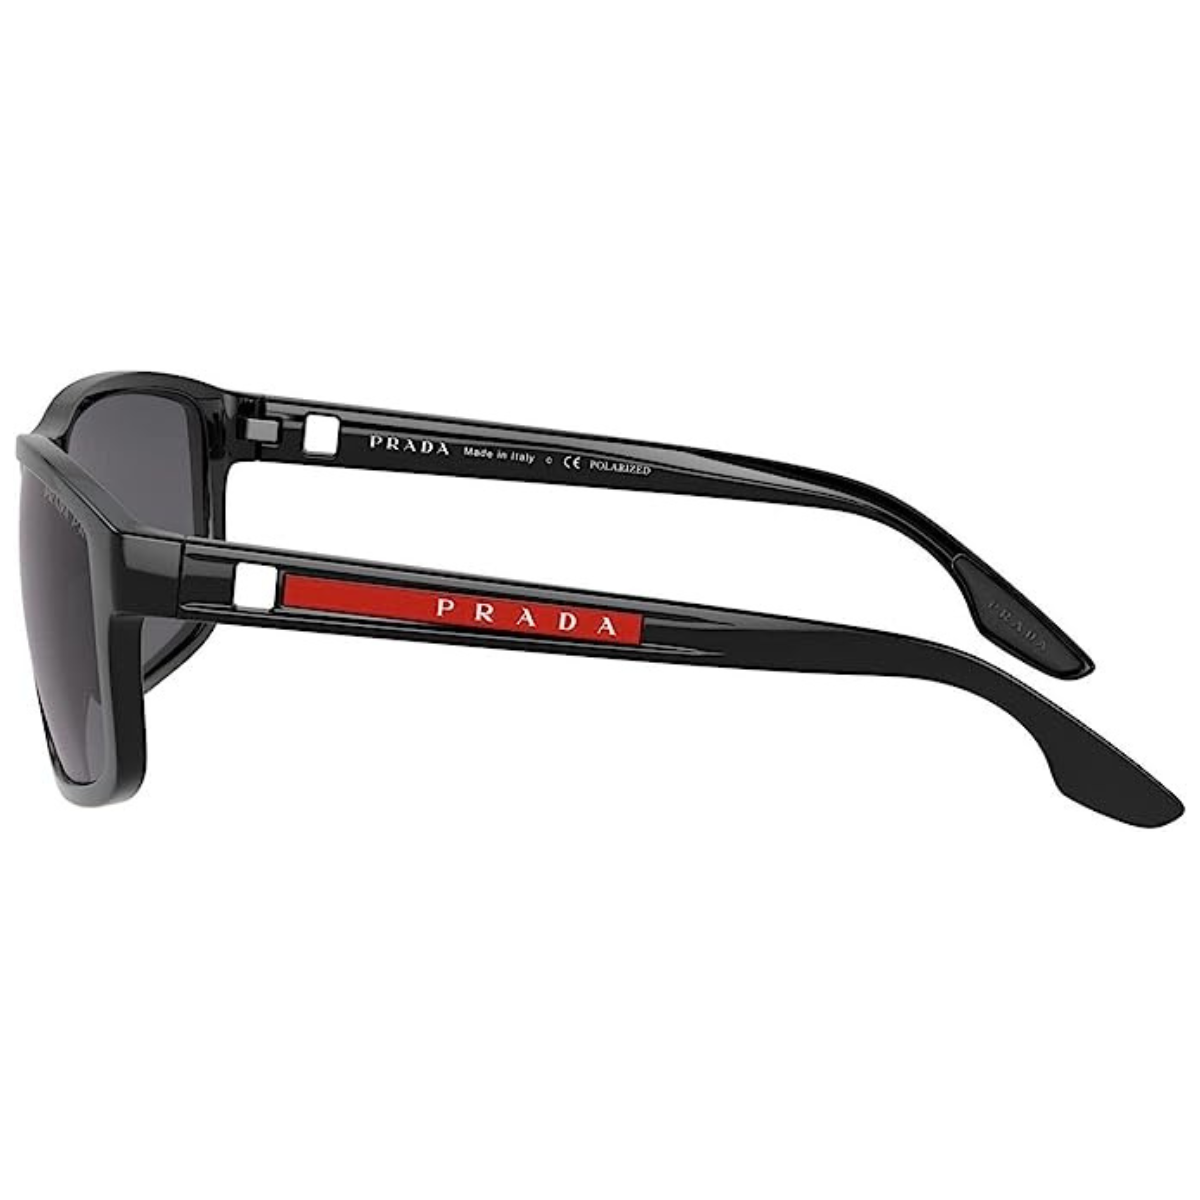 "Enhance your style with Prada SPS 02XS - DG002G sunglasses for men, perfect for any occasion, available at Optorium."